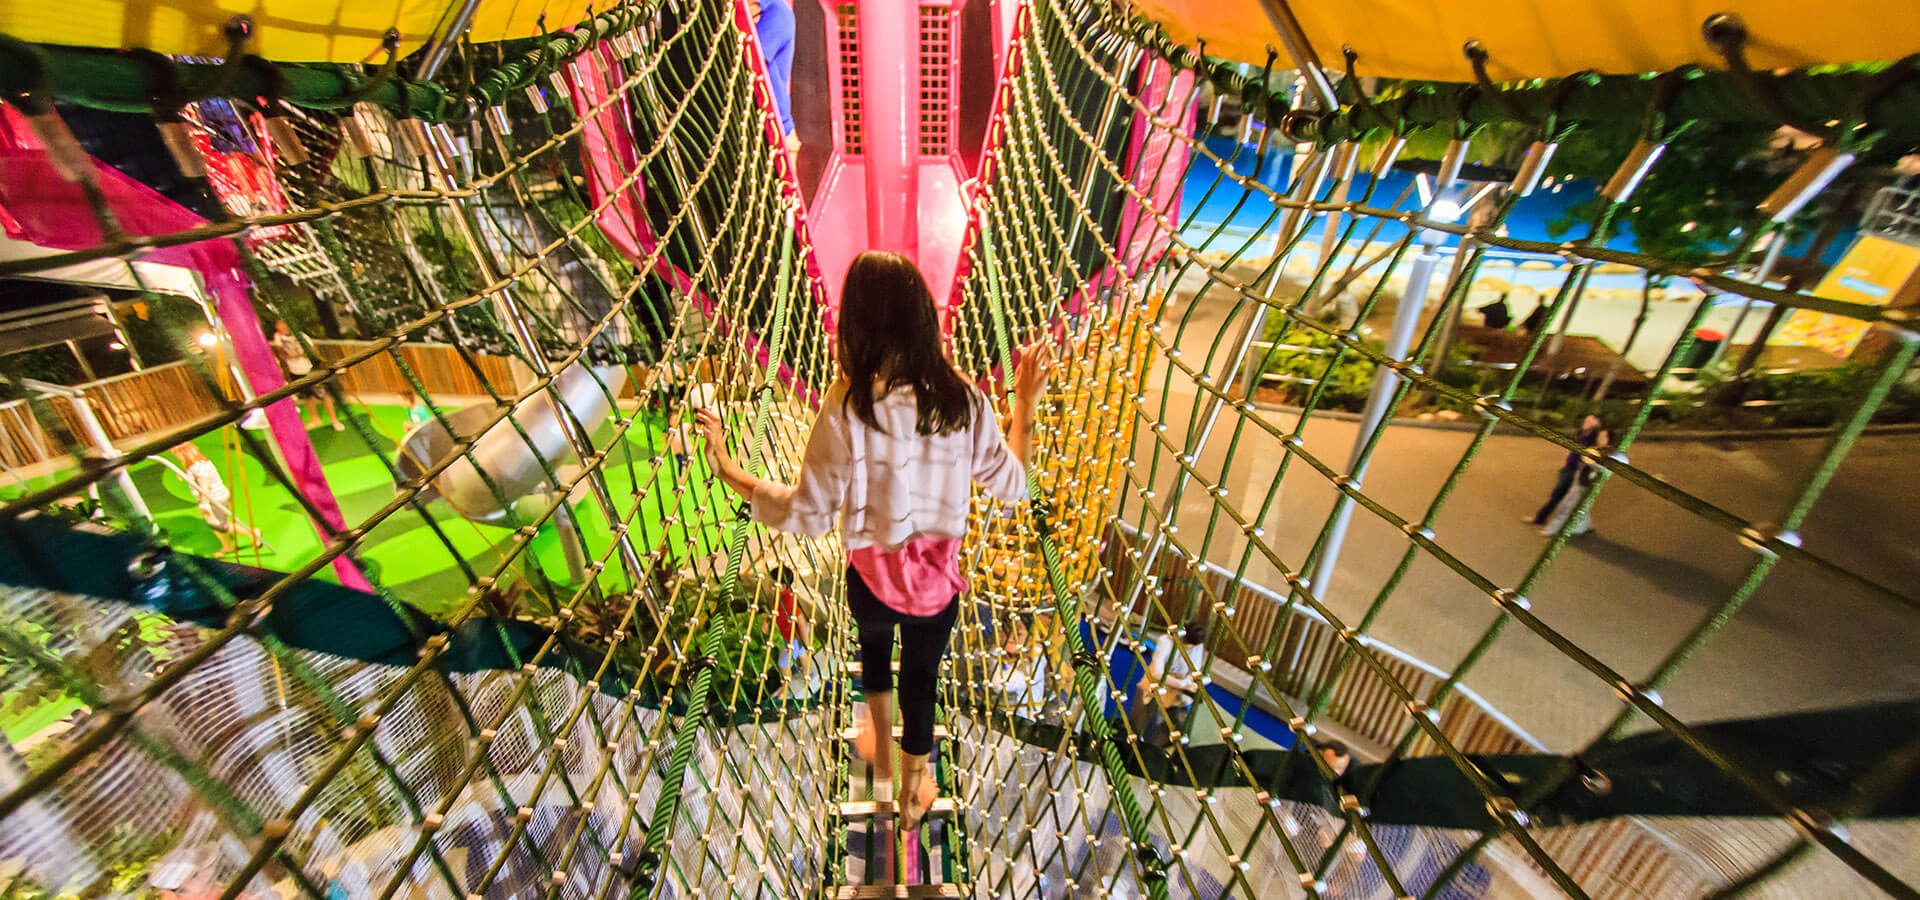 4 Unique Playgrounds that WOW!